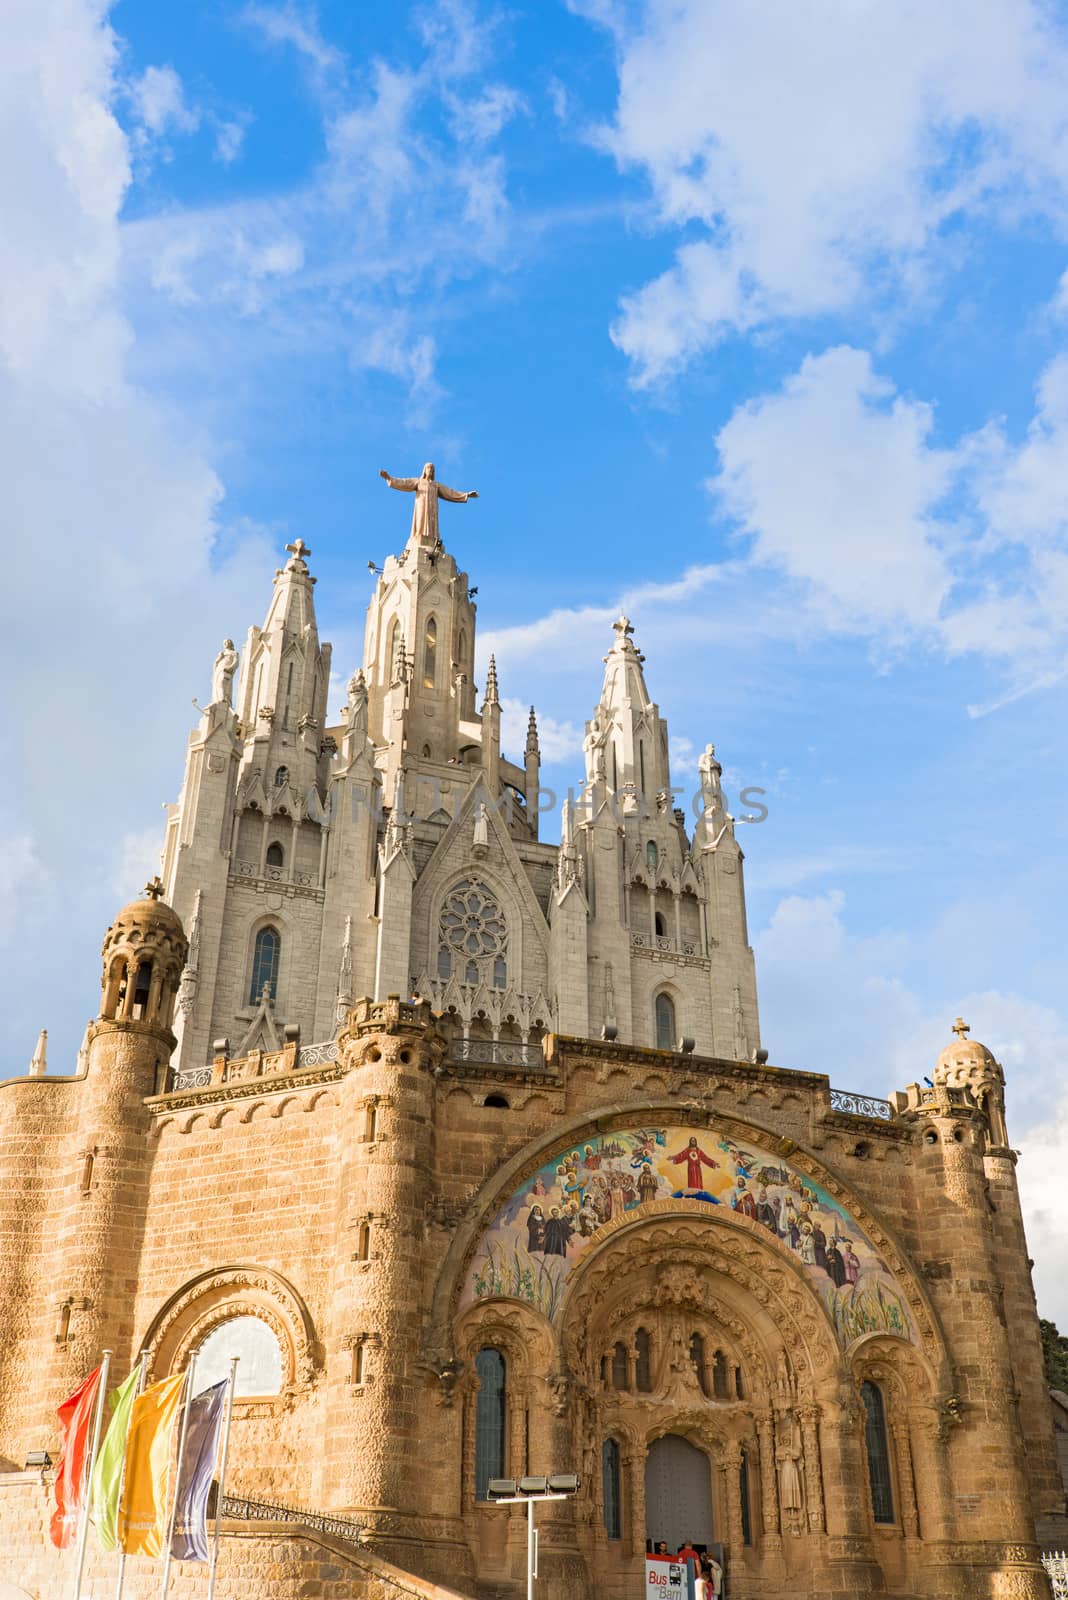 Barcelona, Spain - October 6, 2013: Tourist visiting Church of the Sacred Heart of Jesus on summit of Mount Tibidabo in Barcelona, Catalonia, Spain on sunny day in October 2013.